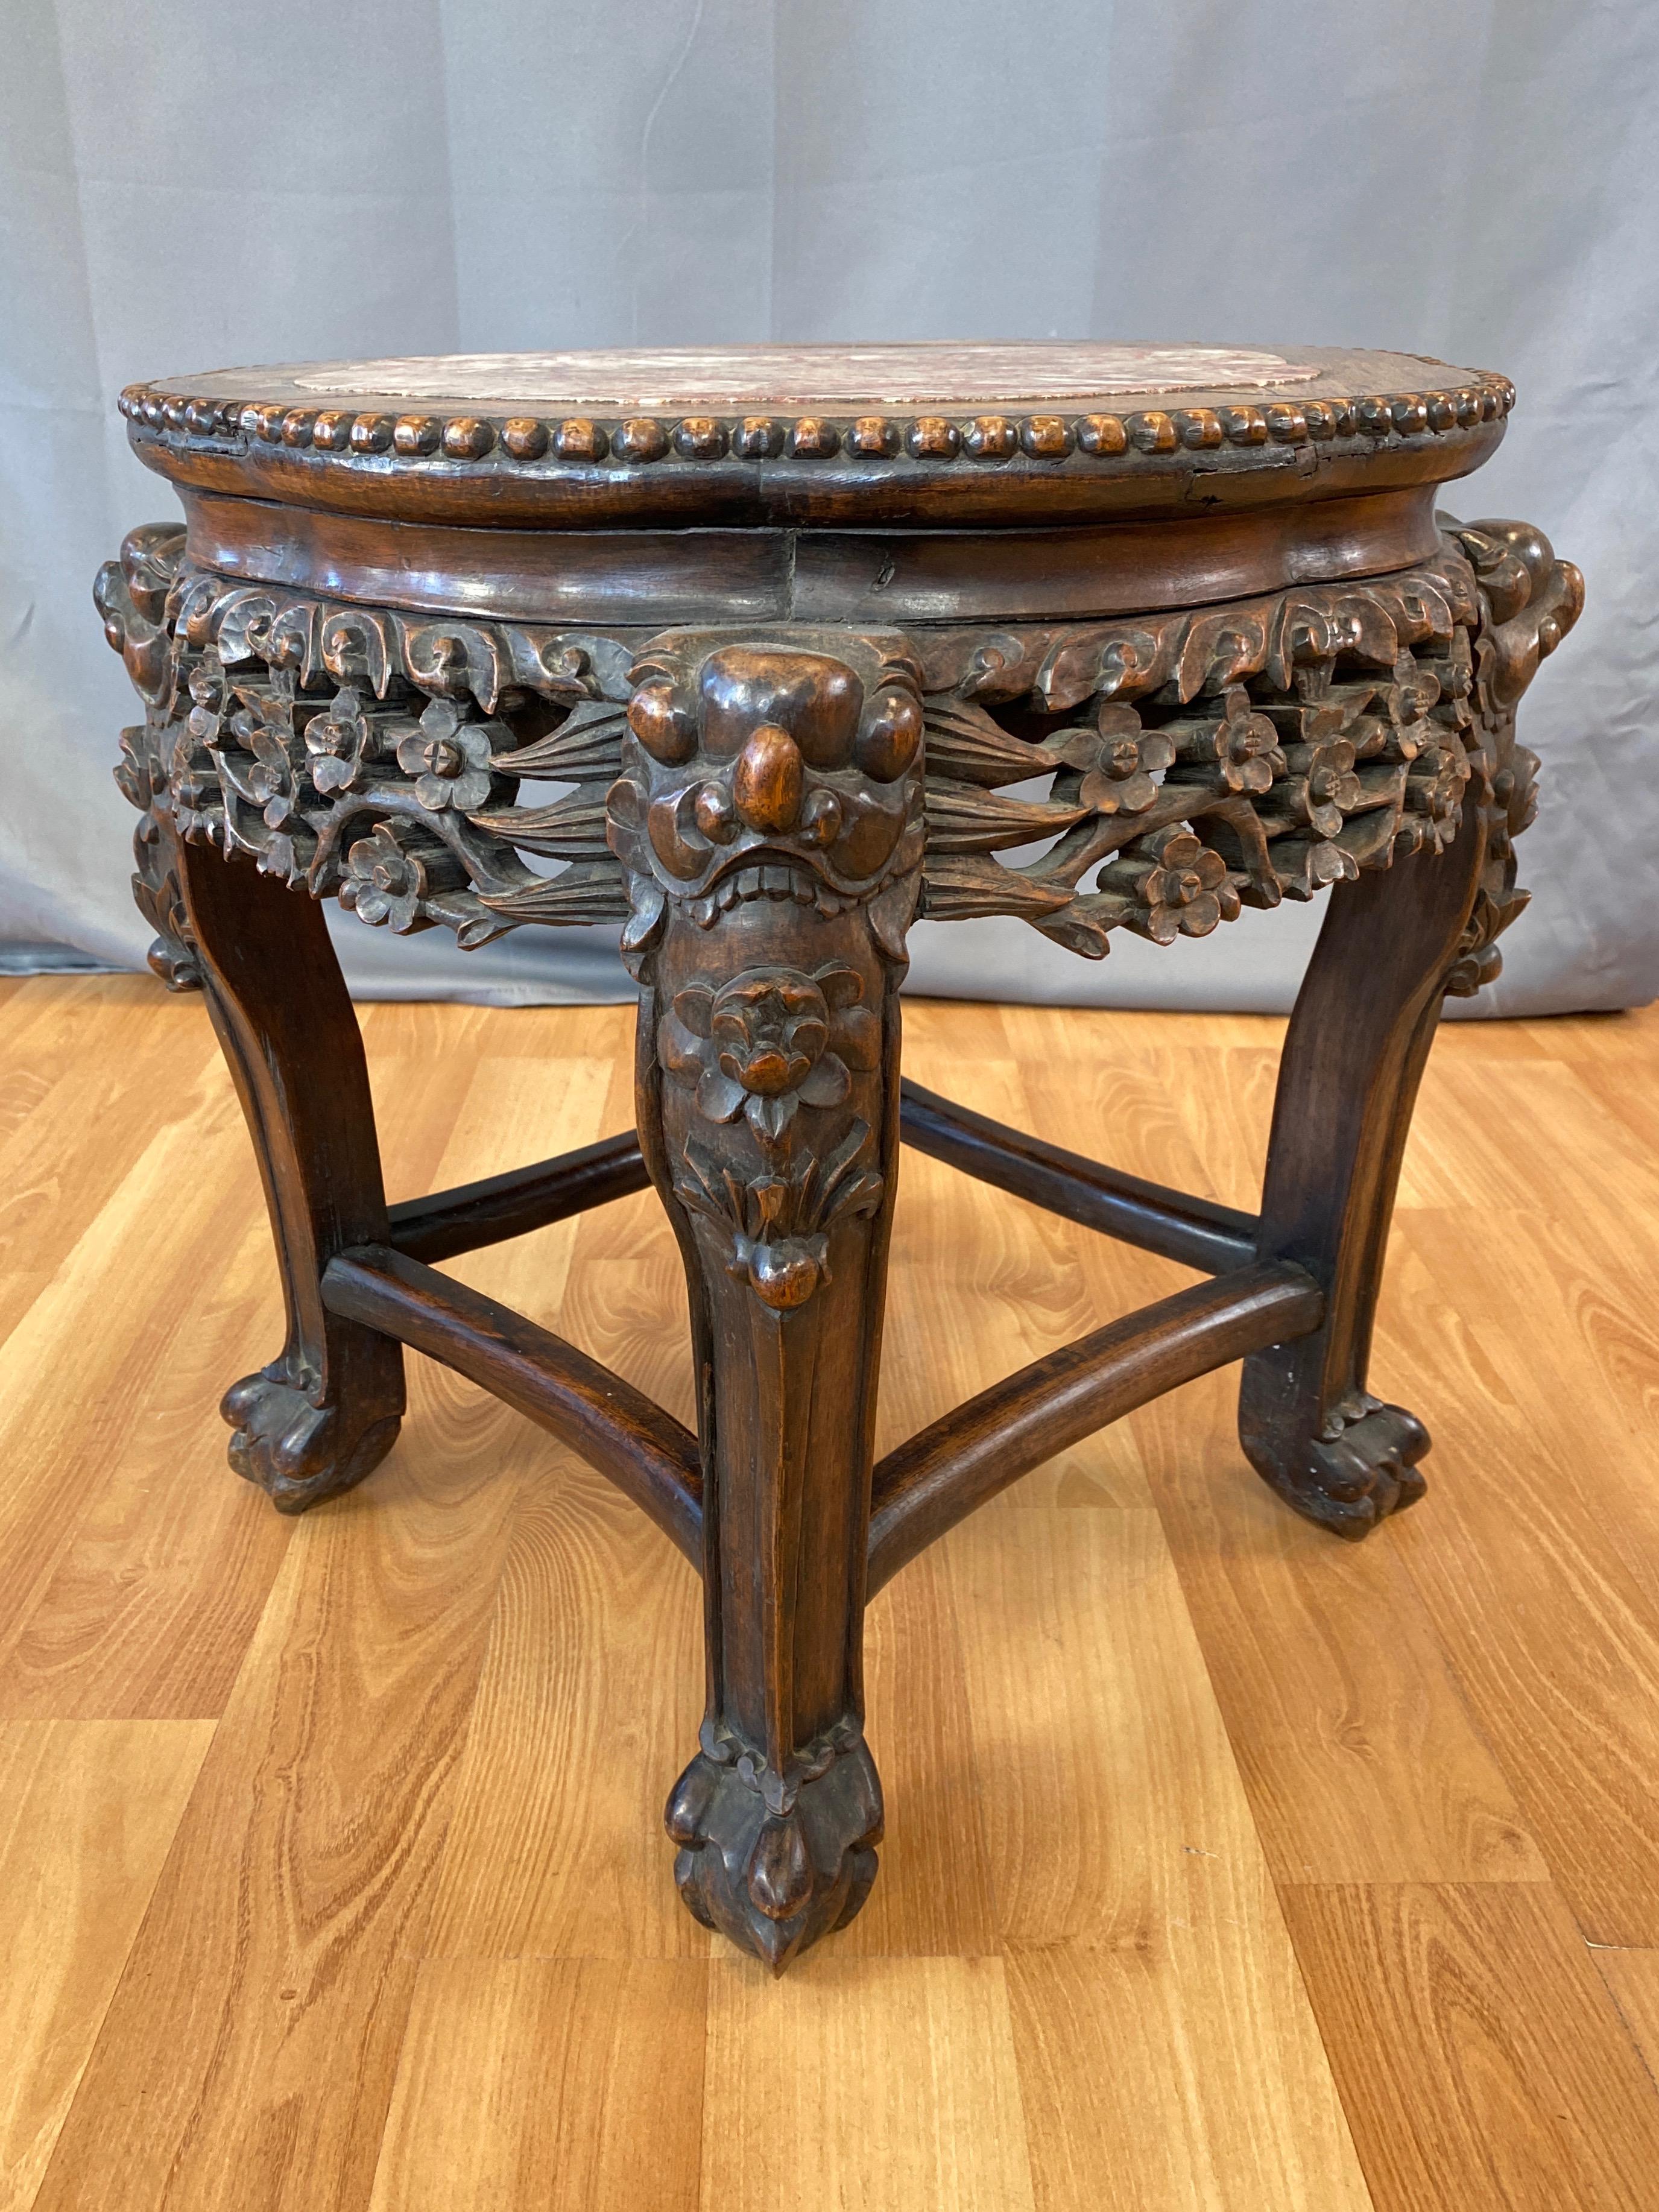 Early 20th Century Chinese Hand Carved Huanghuali and Marble Plant Stand or Side Table, c. 1900